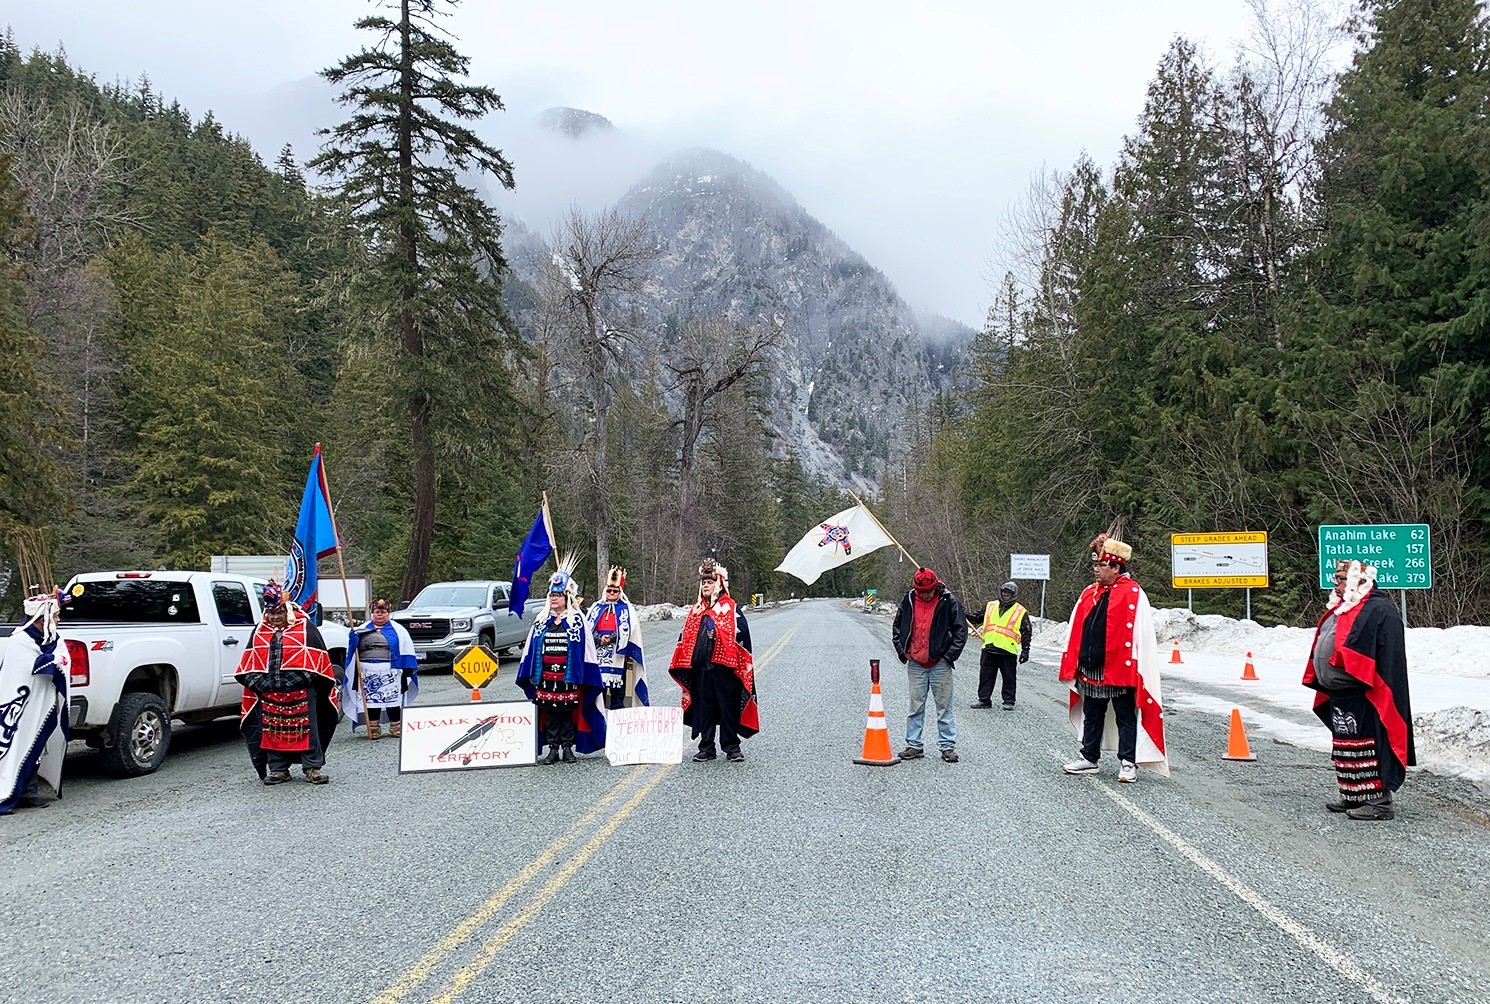 As B.C. eases restrictions, remote Indigenous communities fear travel could bring COVID-19